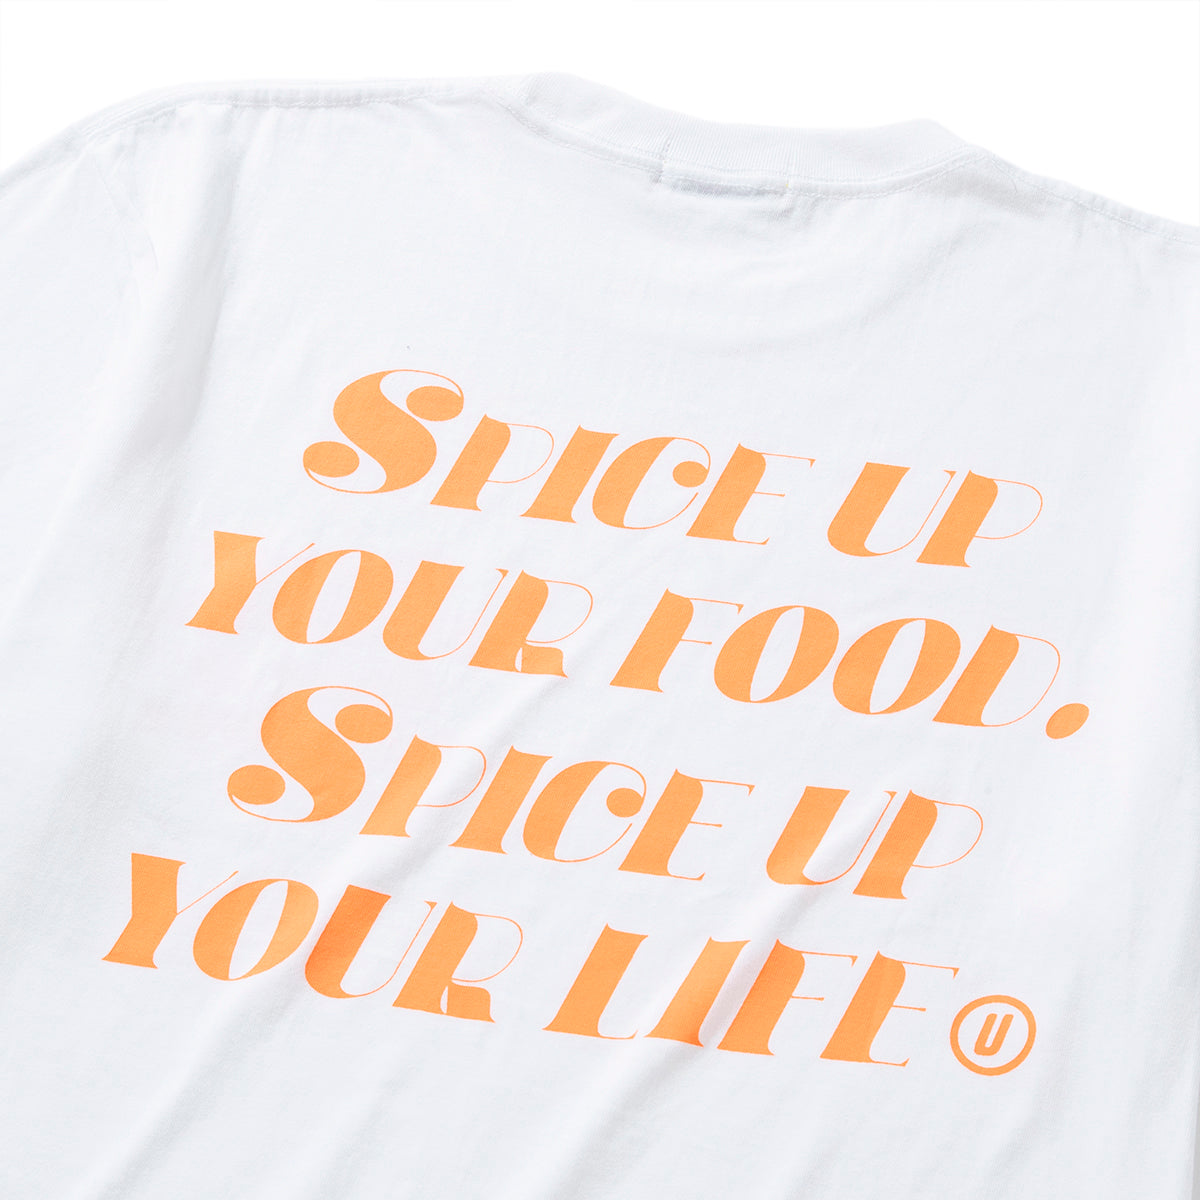 SPICE UP YOUR LIFE T-SHIRT